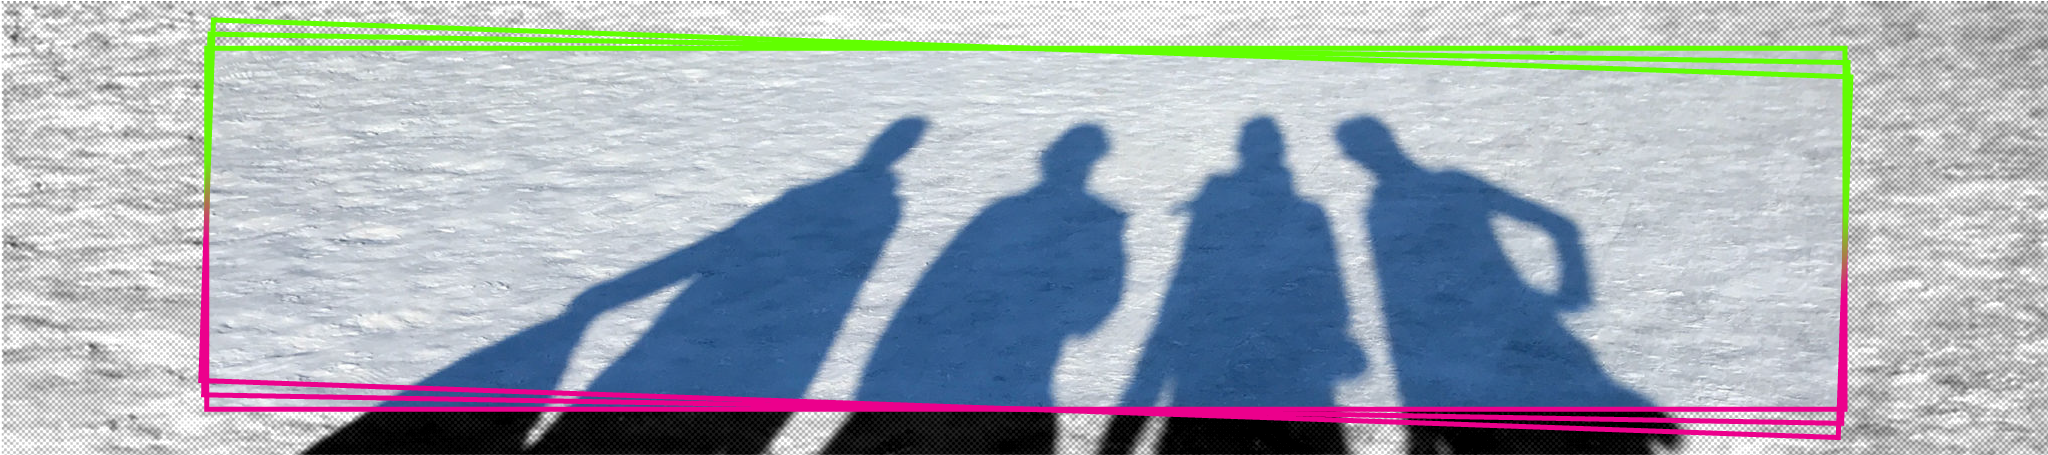 the shadows of 4 people on the snow